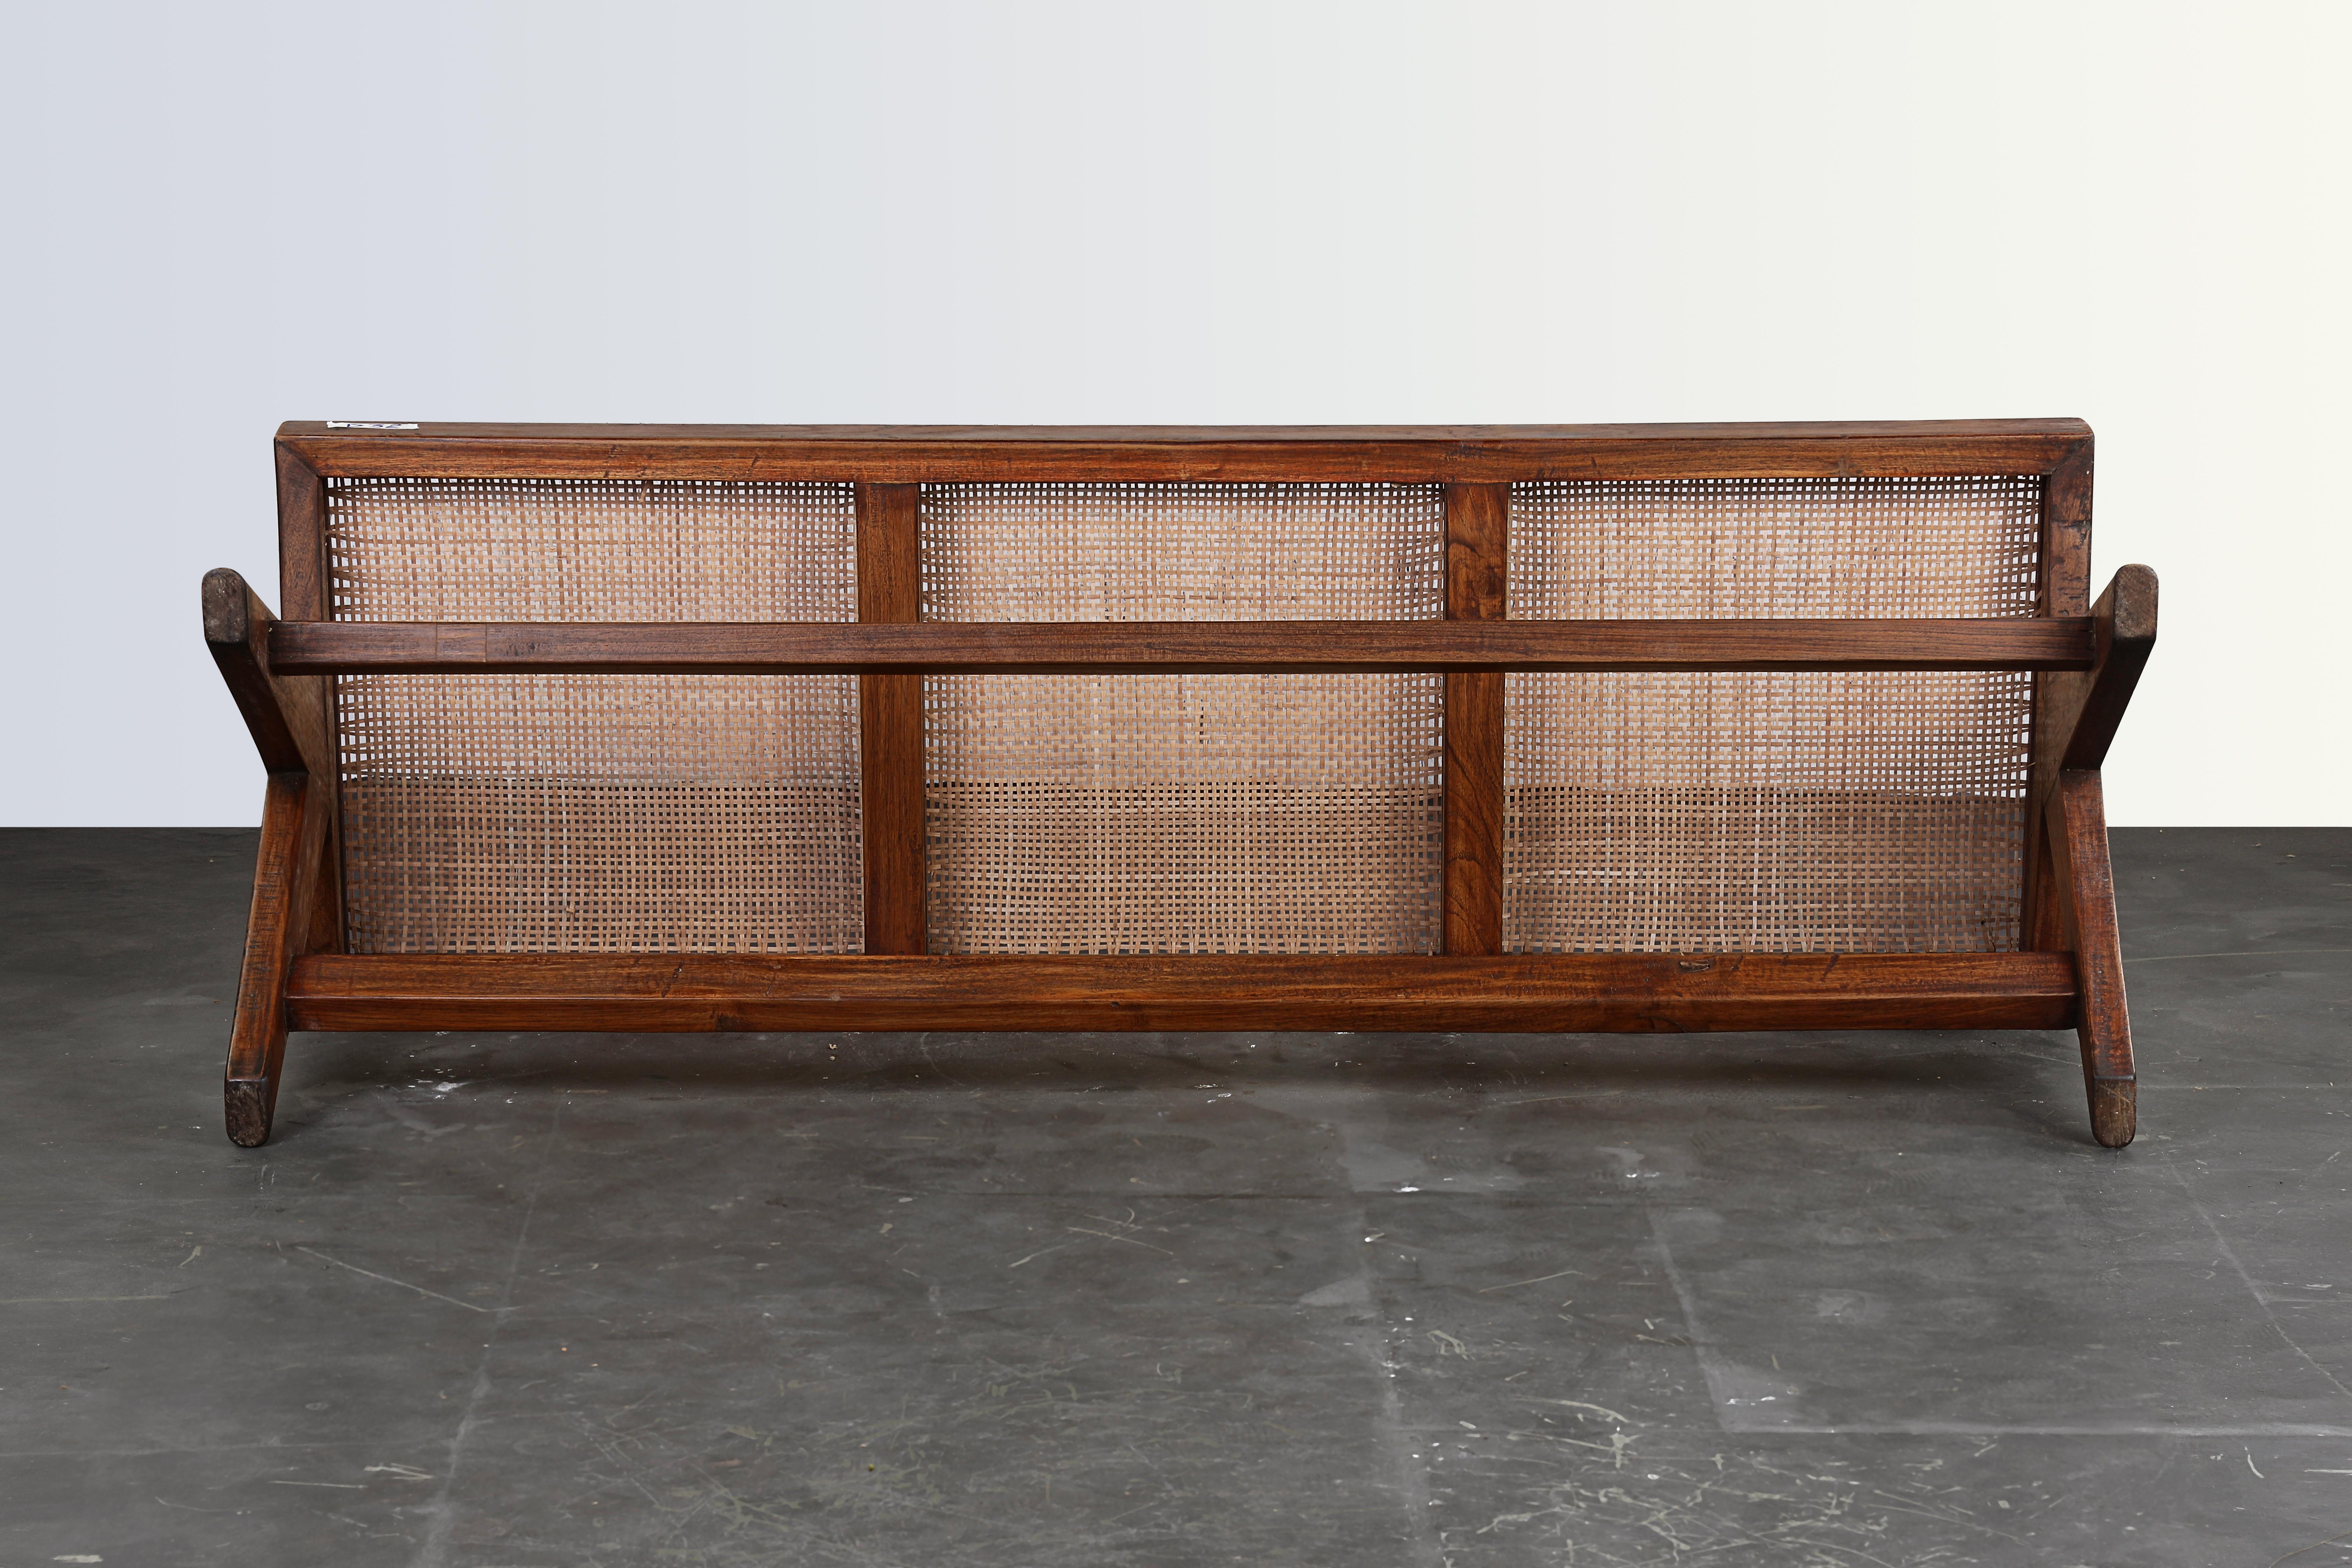 Mid-20th Century Pierre Jeanneret Cane Bench / Authentic Mid-Century Modern Chandigarh PJ-SI-33-D